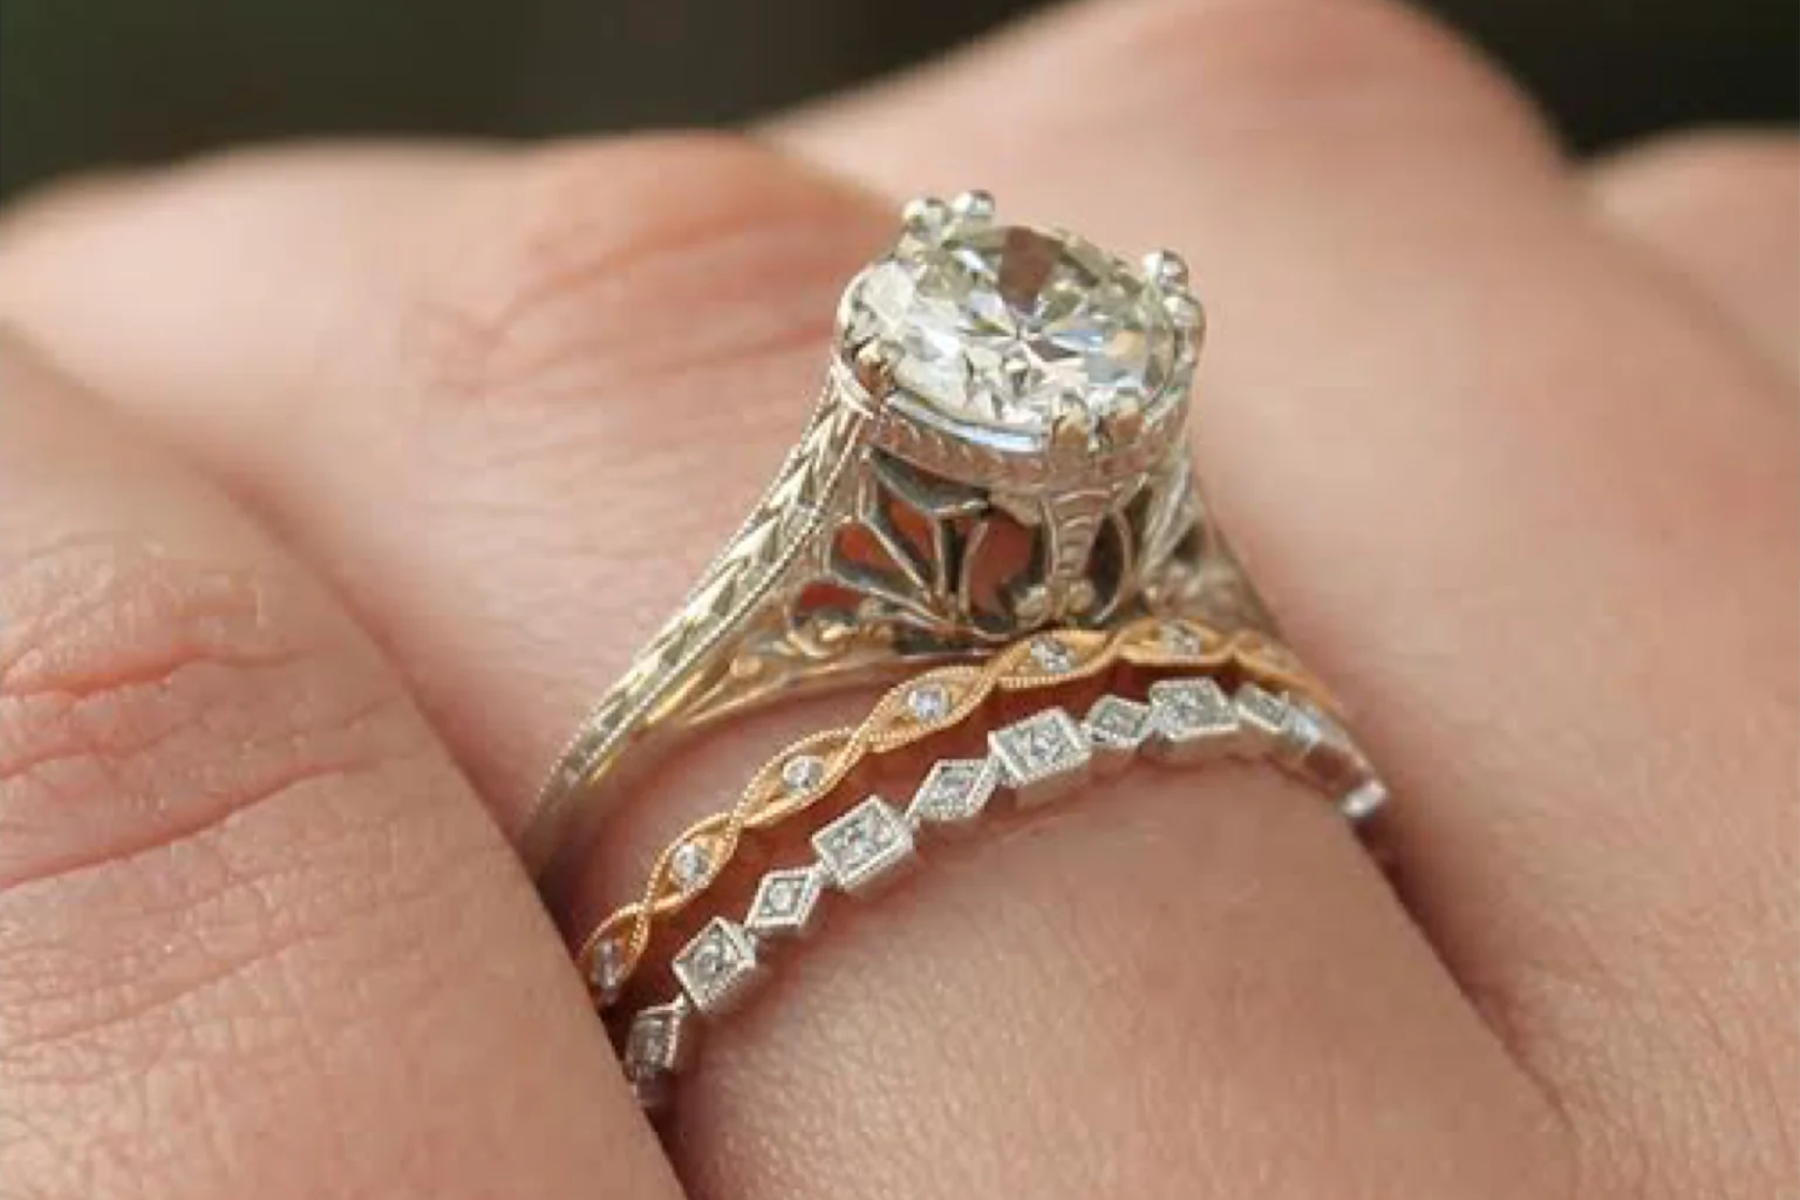 Antique Wedding Rings - The Sentimental Choice